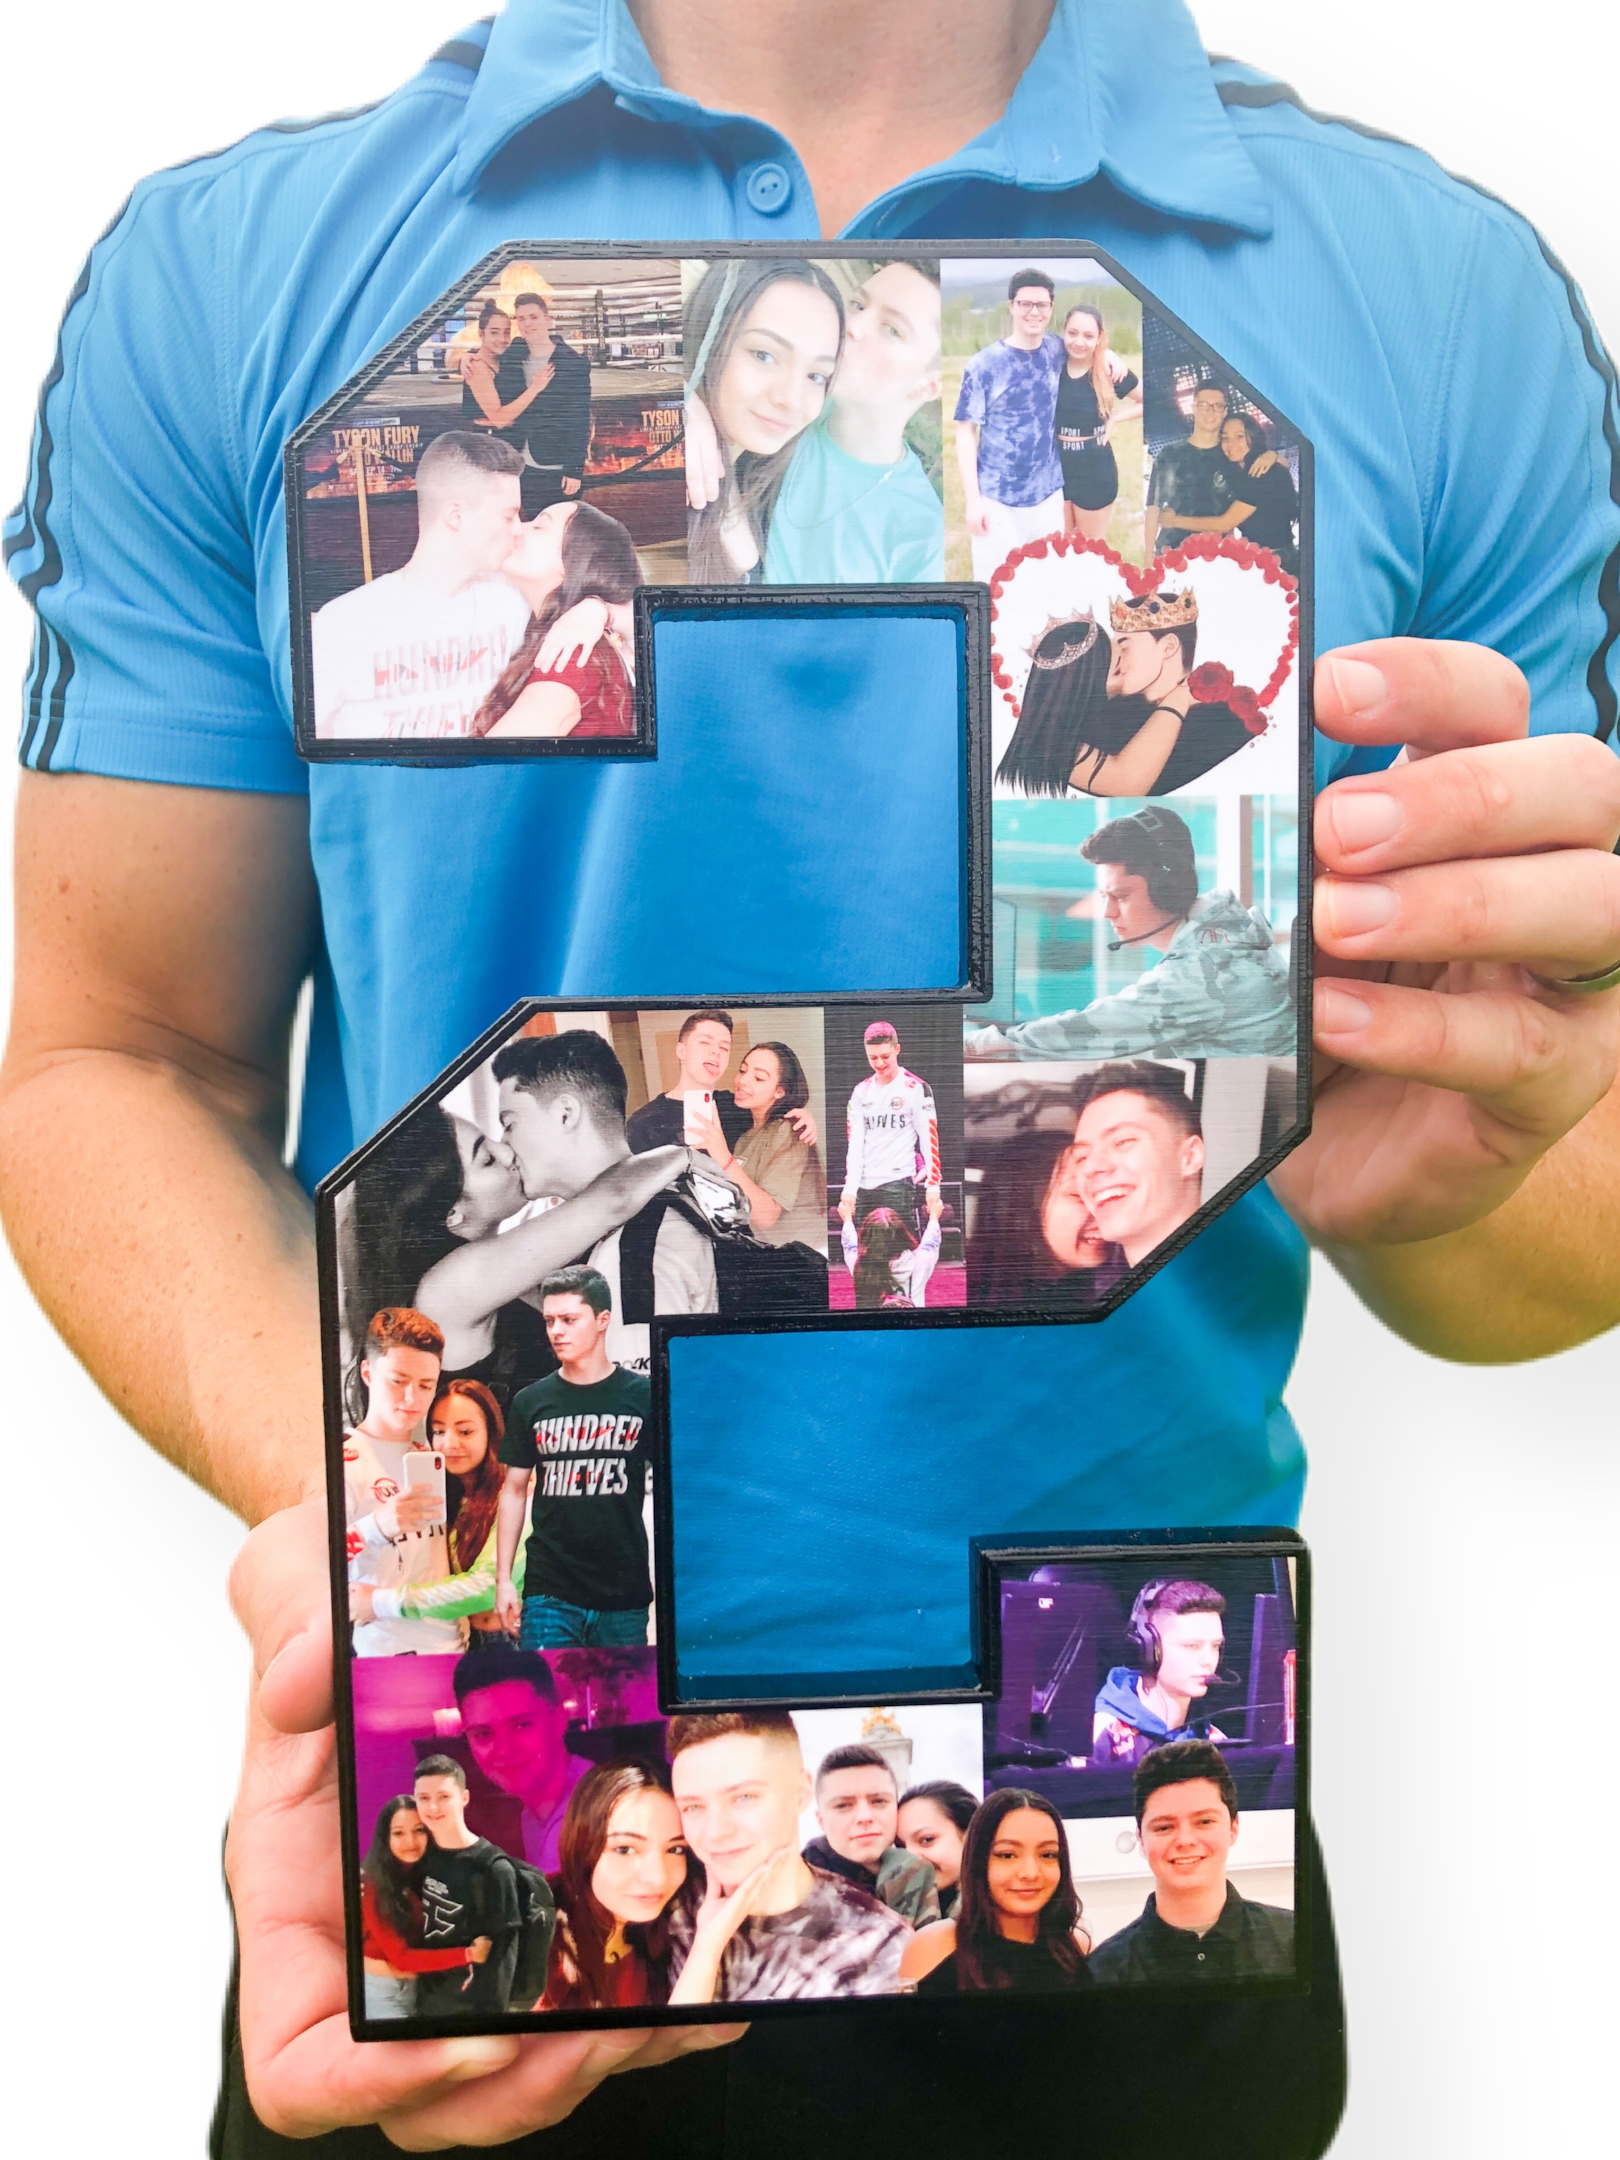 Use our site to upload your images and we will take care of your photo collage gift!